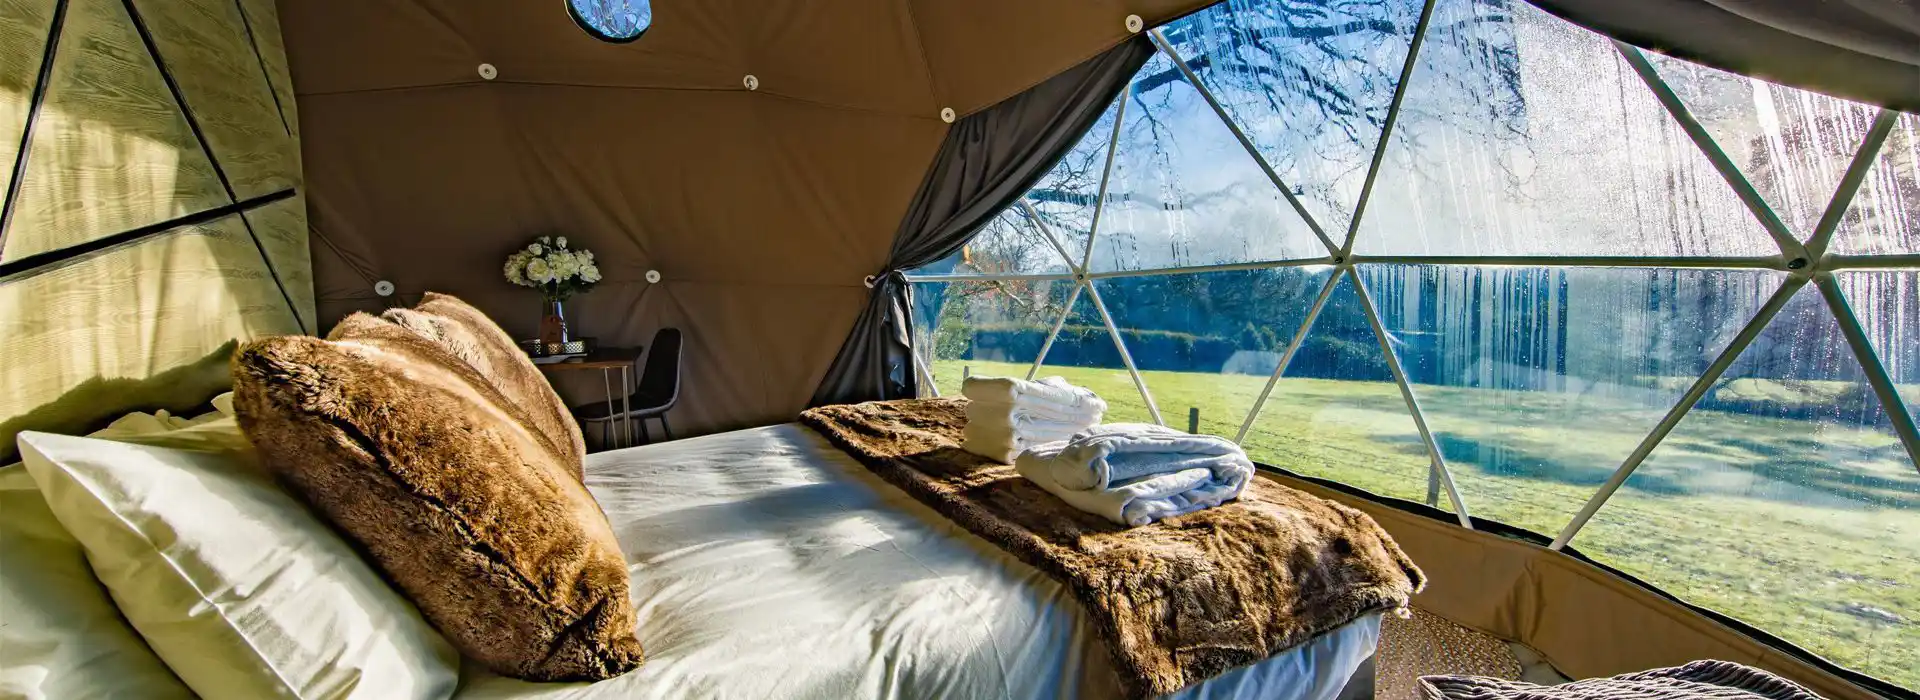 Glamping in South East England